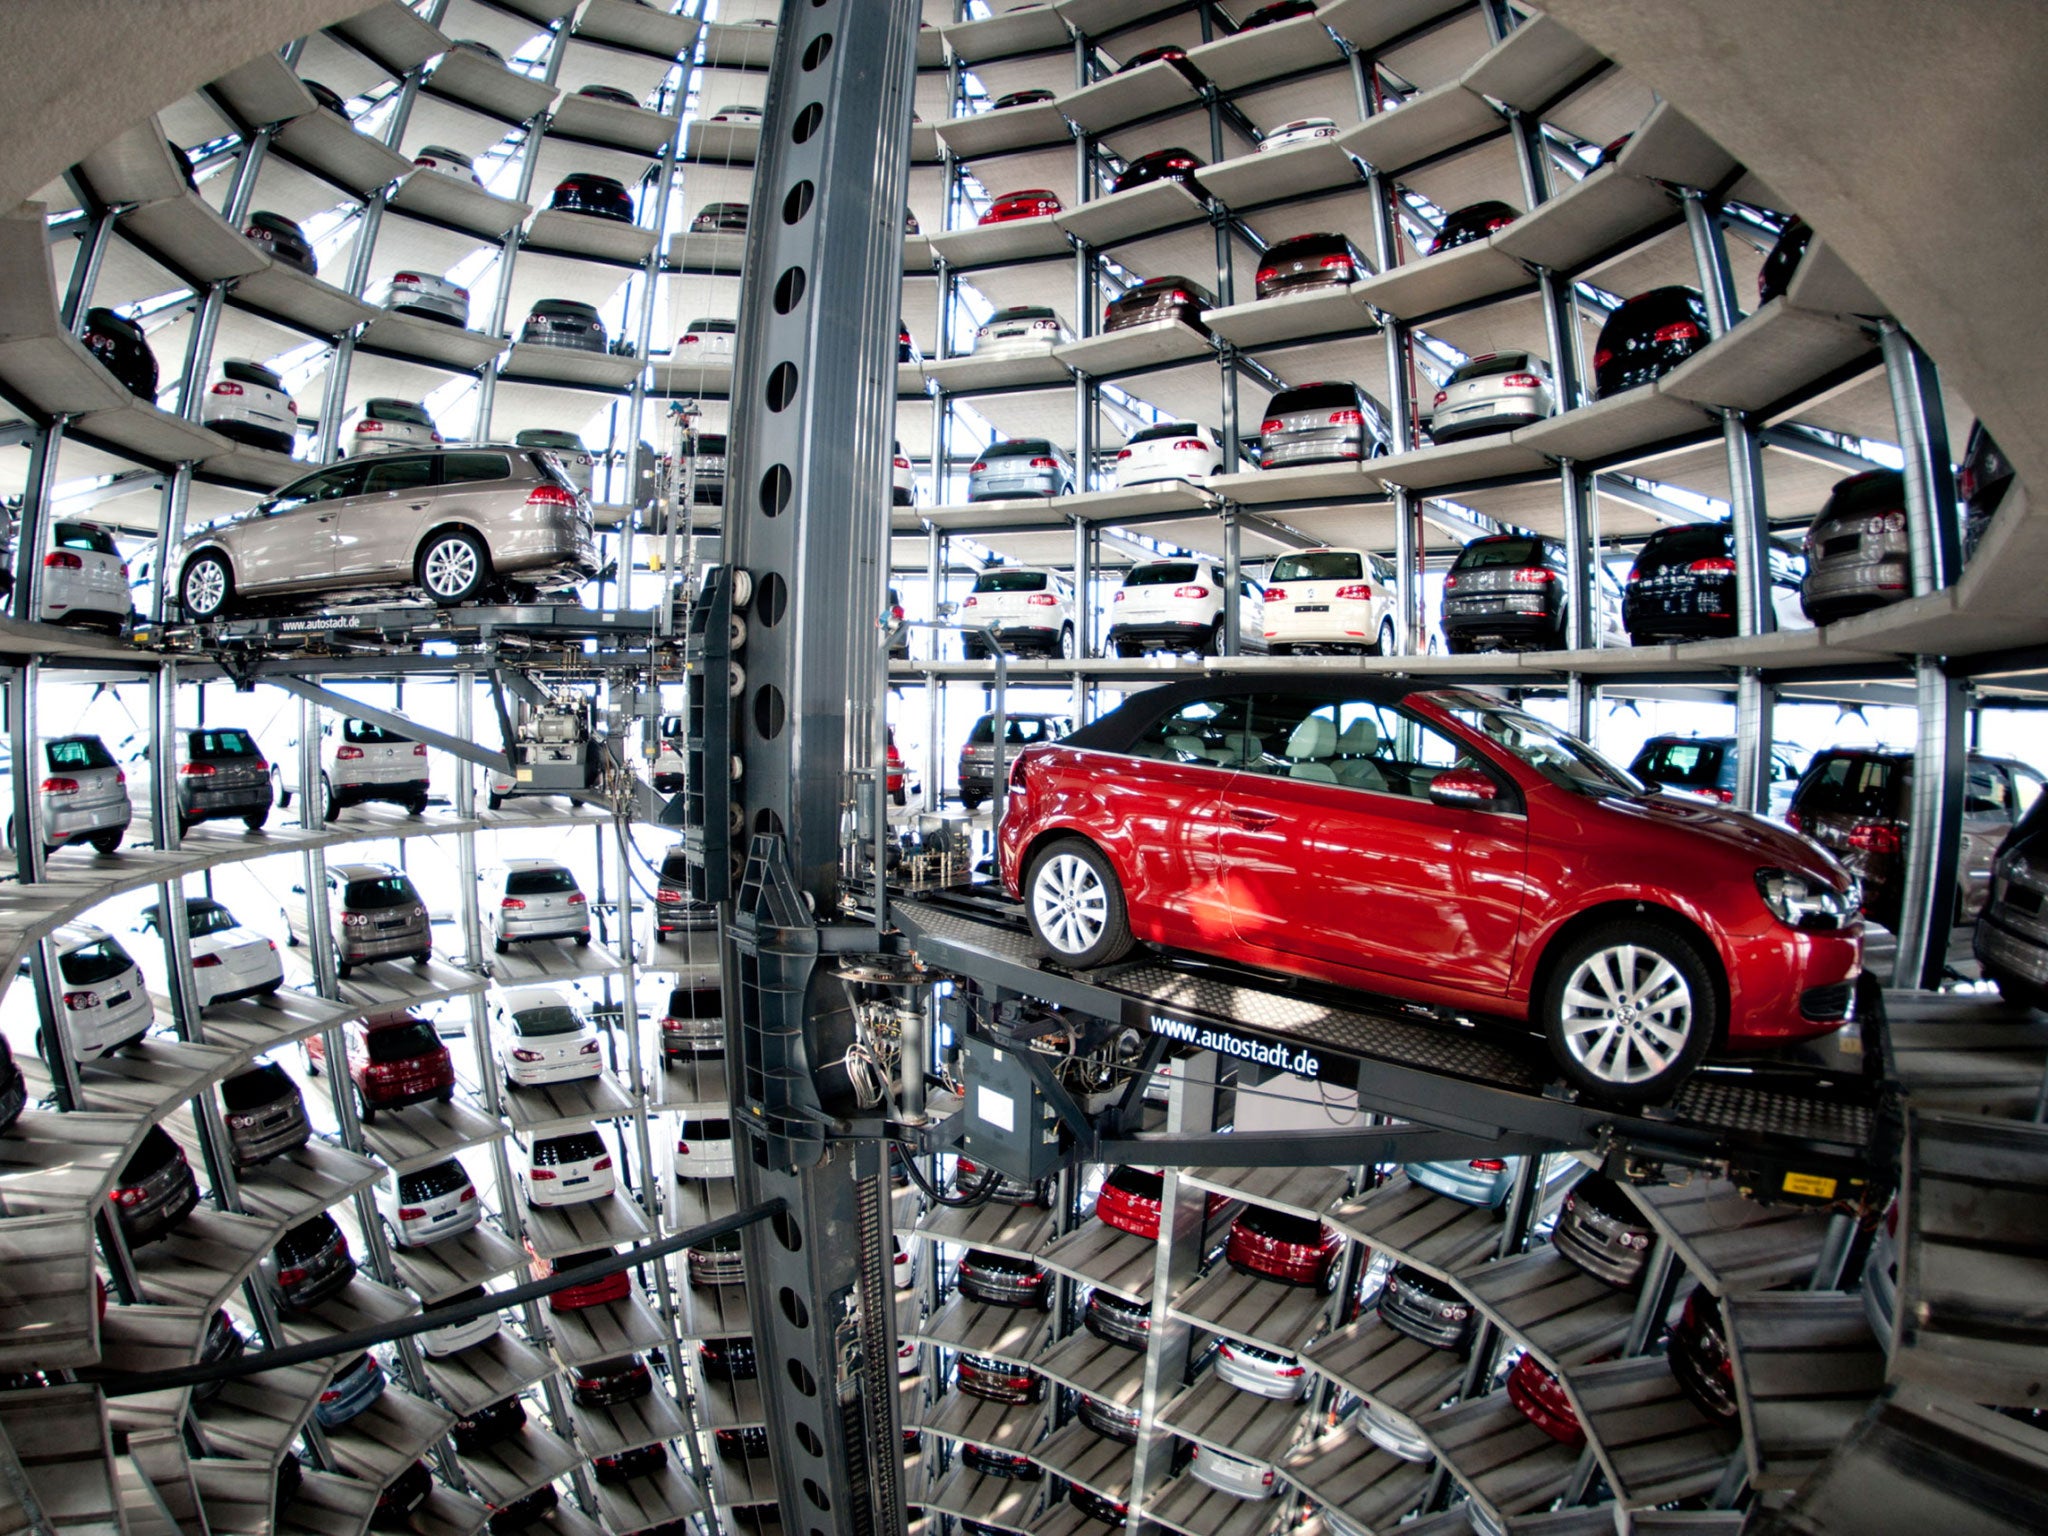 Volkswagen has set aside €6.5bn to cover the scandal